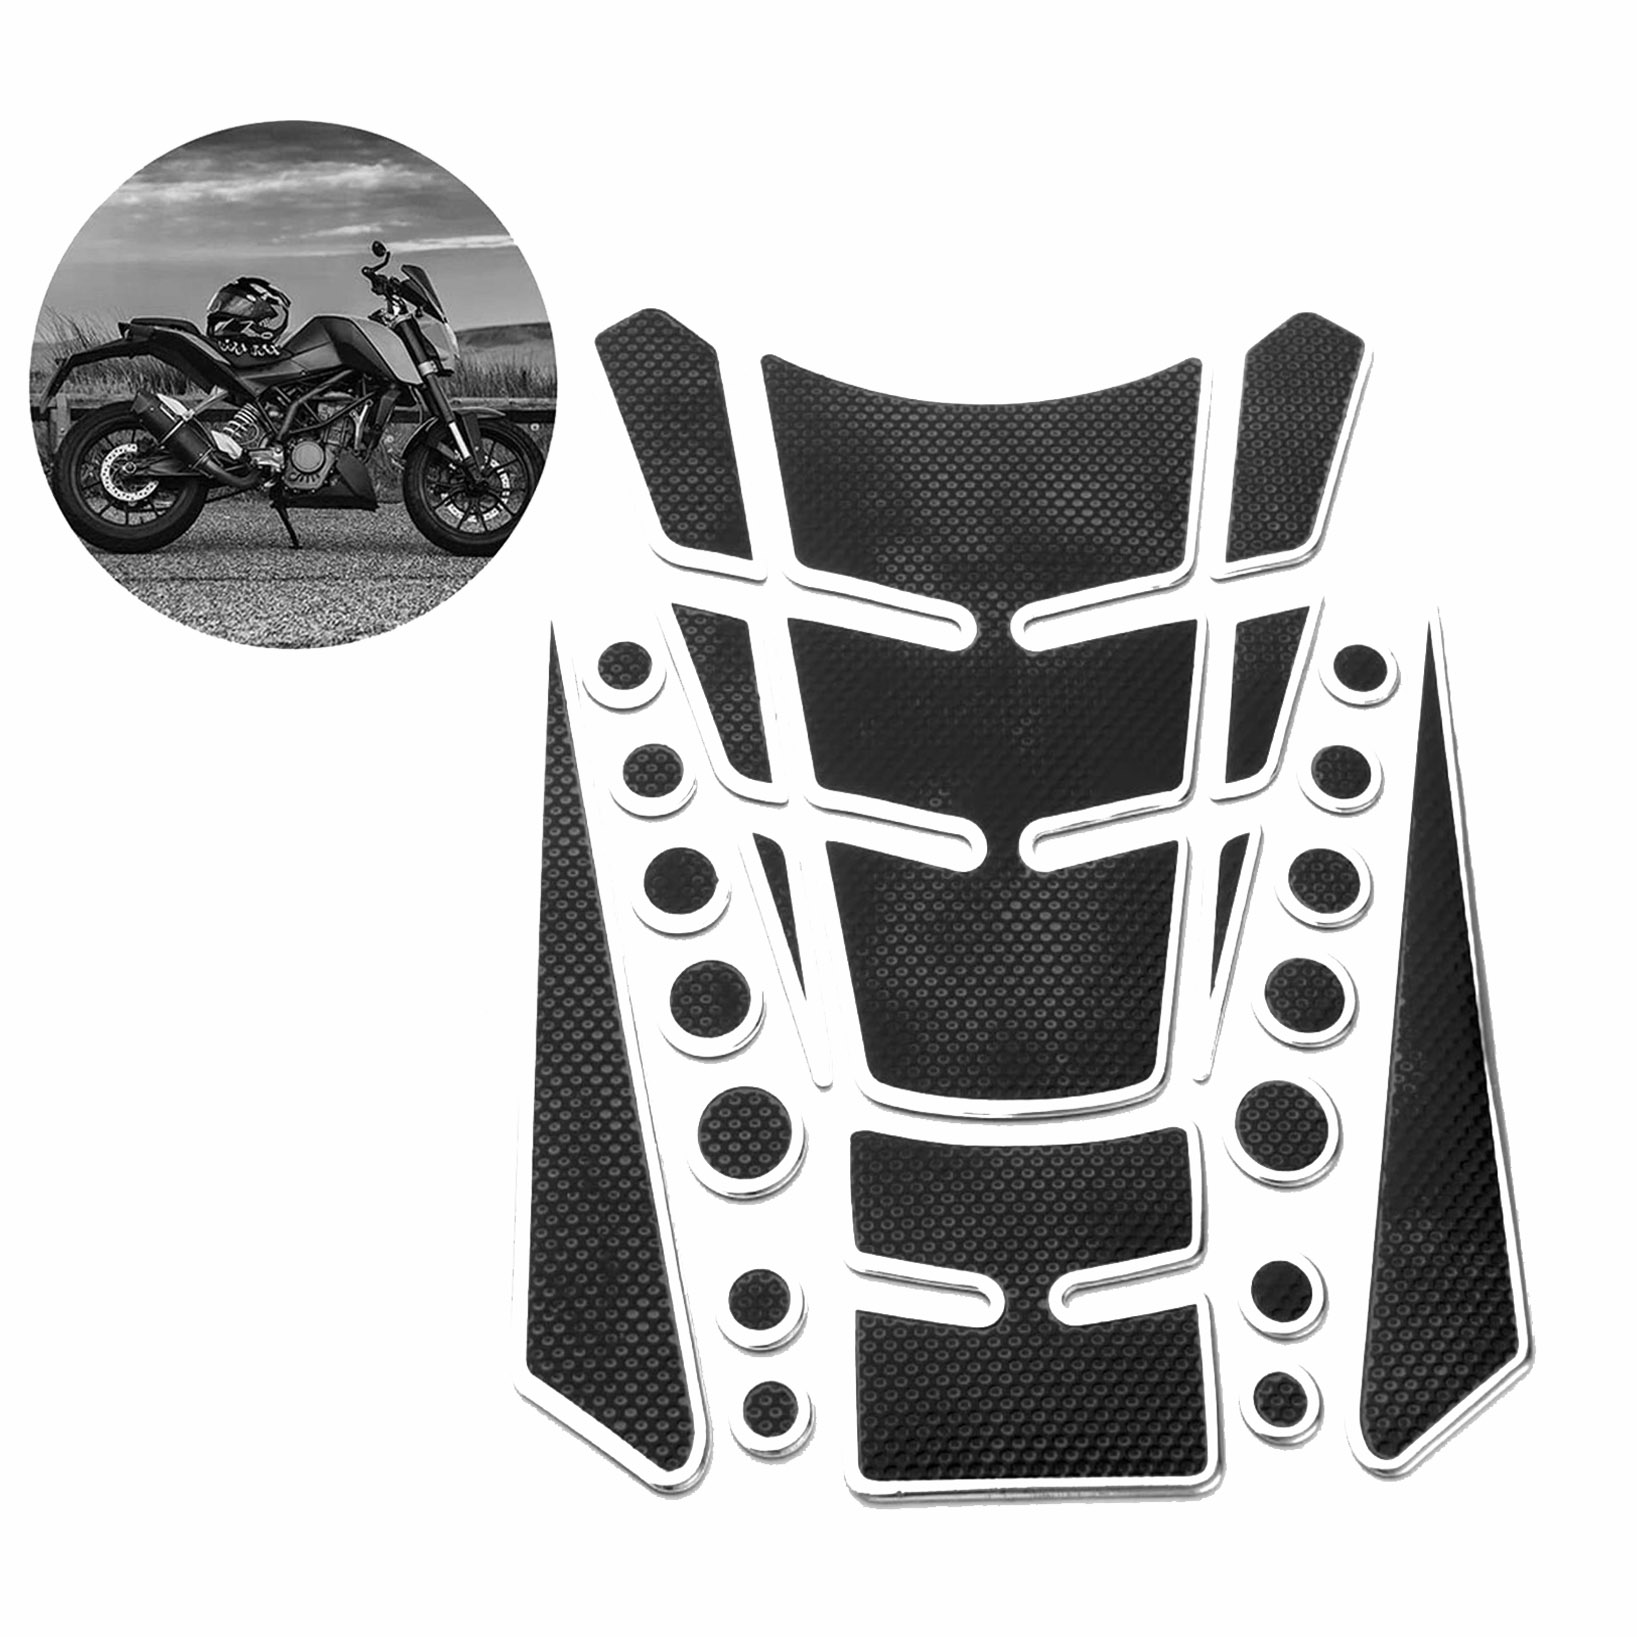 3D Dotted Black with Silver Outline Motorcycle Gas Fuel Oil Tank